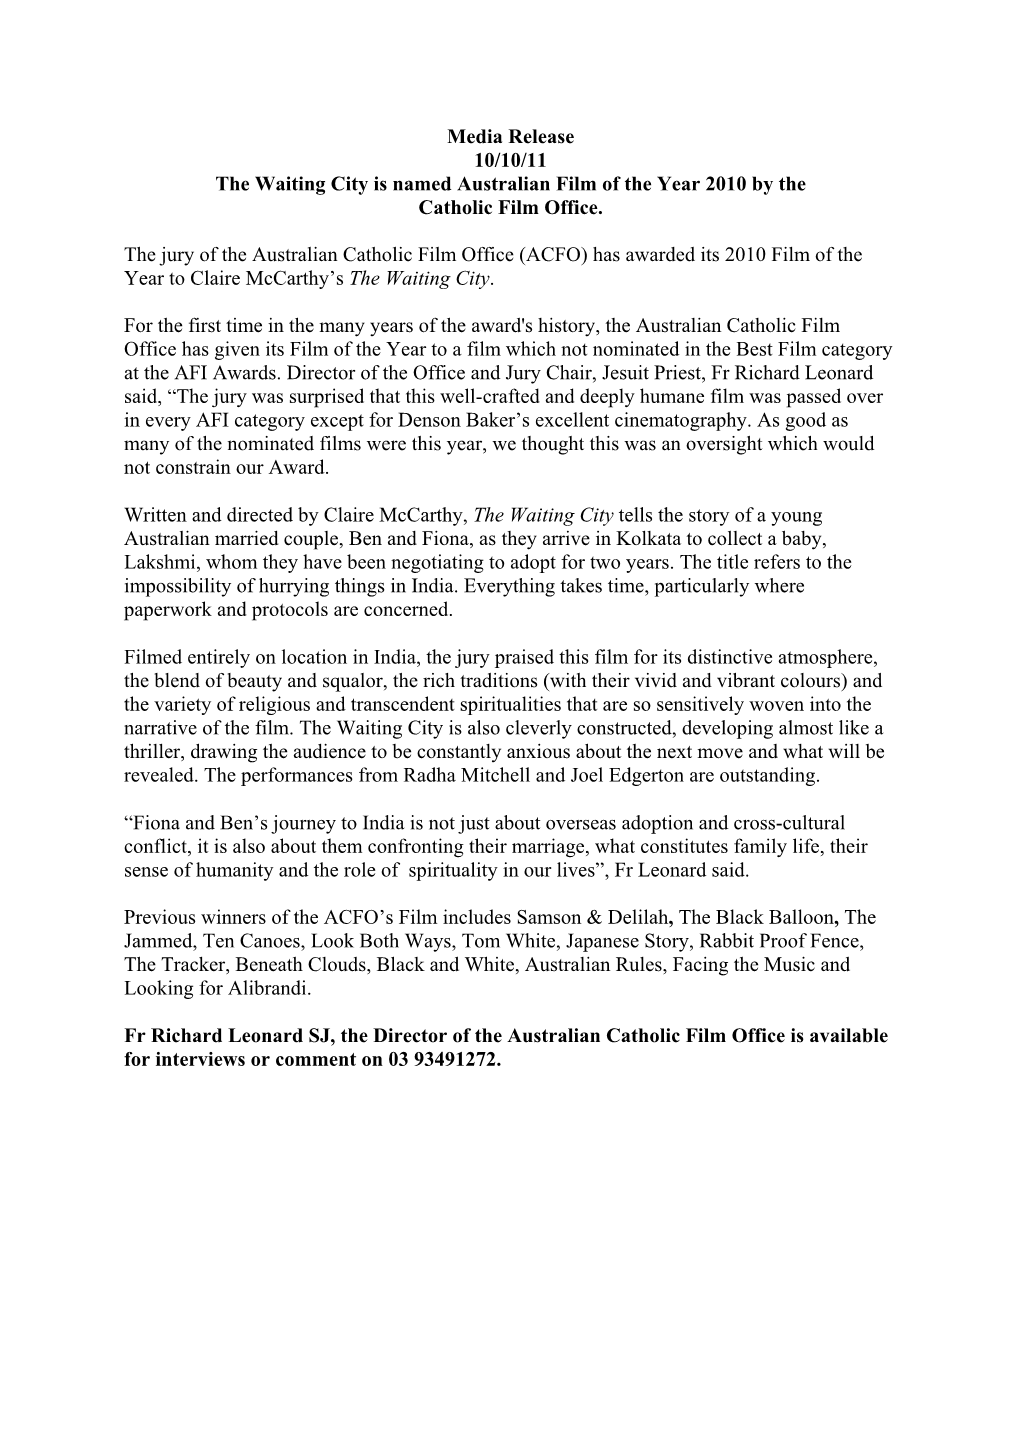 Media Release 10/10/11 the Waiting City Is Named Australian Film of the Year 2010 by the Catholic Film Office